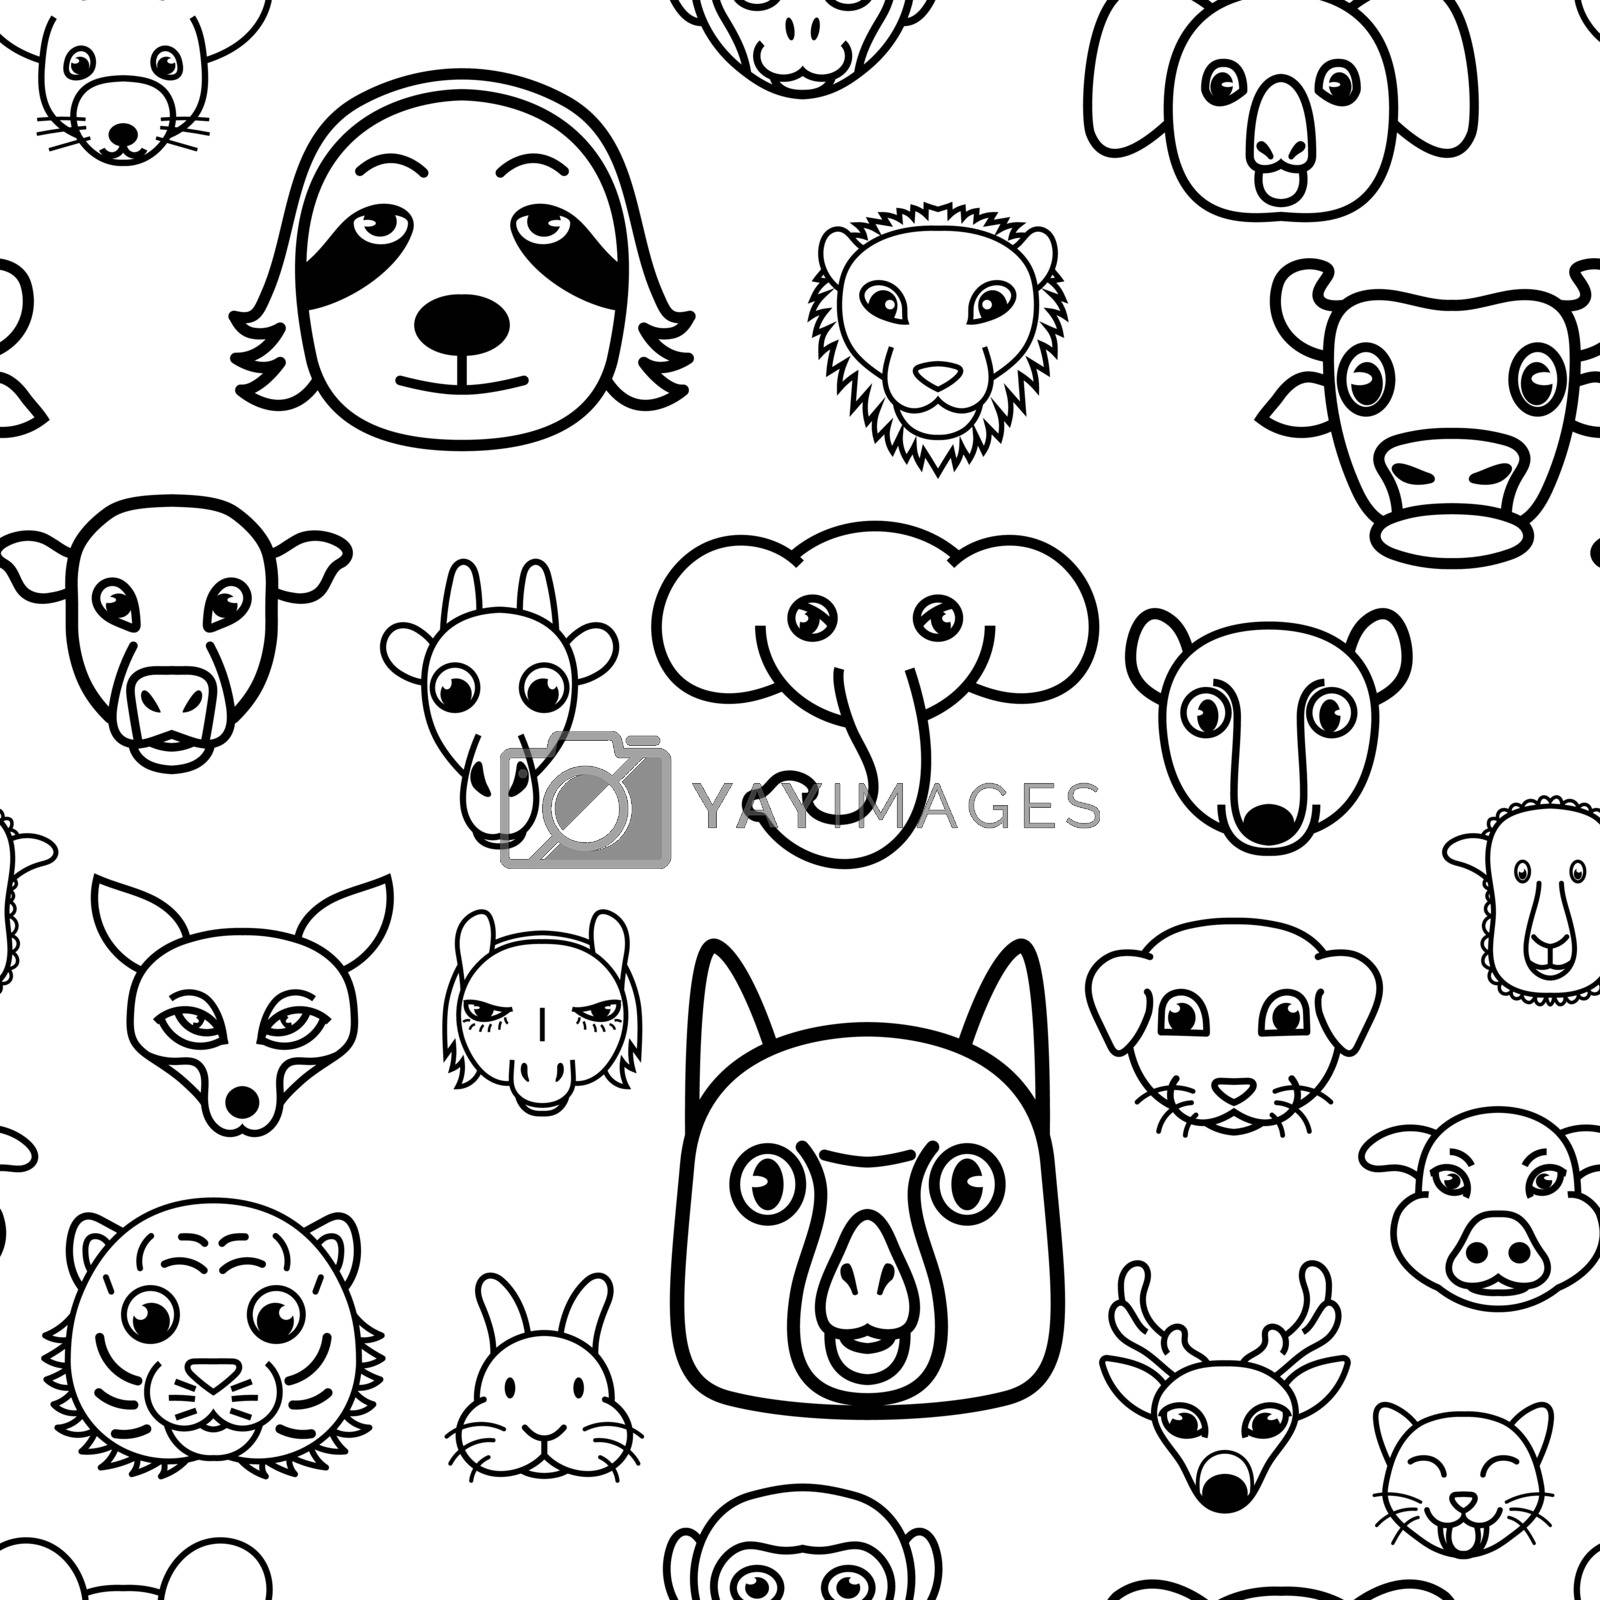 Royalty free image of Seamless pattern background of cute kawaii cartoon animals by hadkhanong